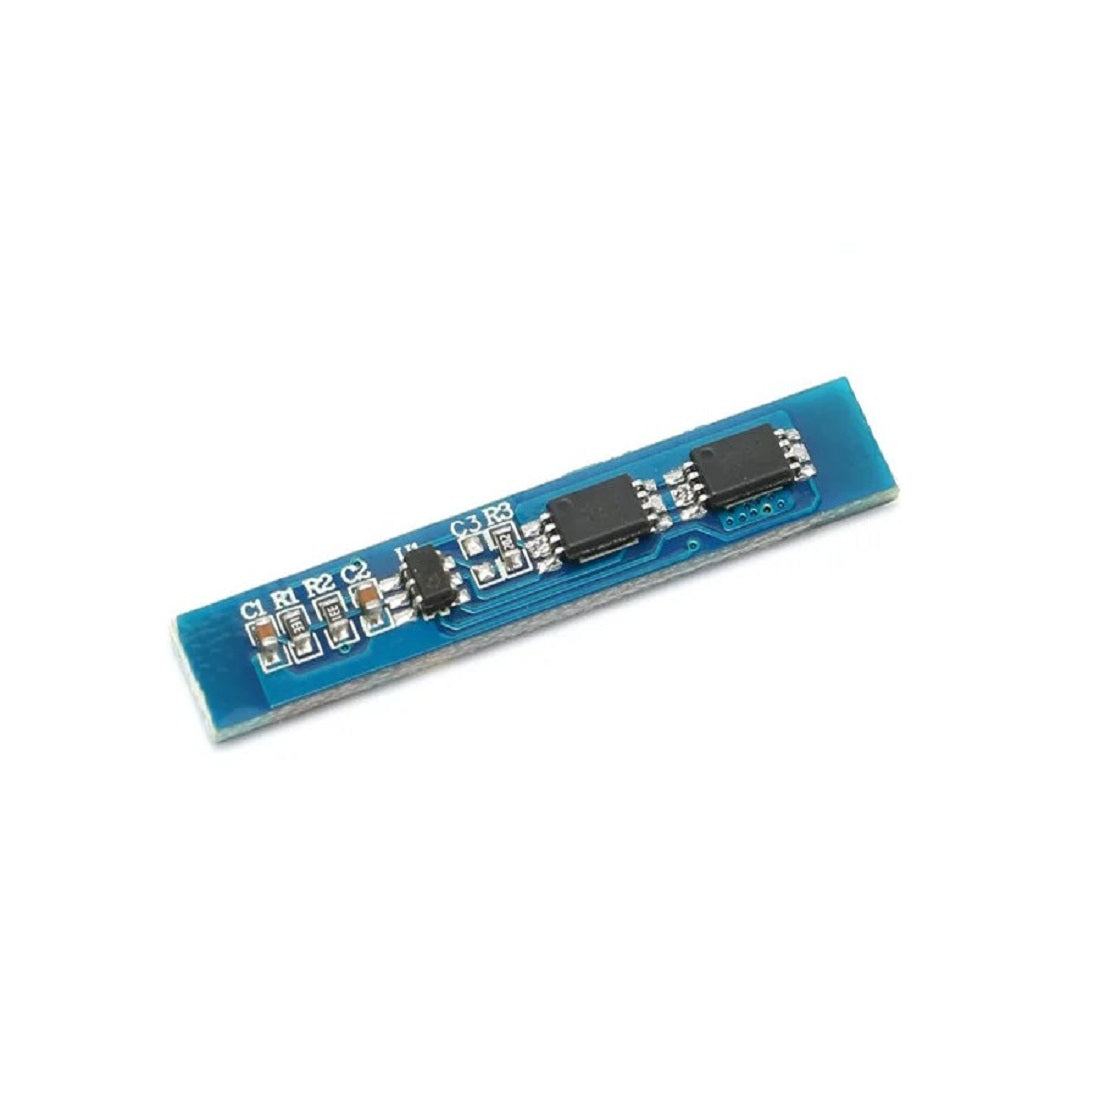 Buy Battery management systems (BMS) modules pack of 1pcs